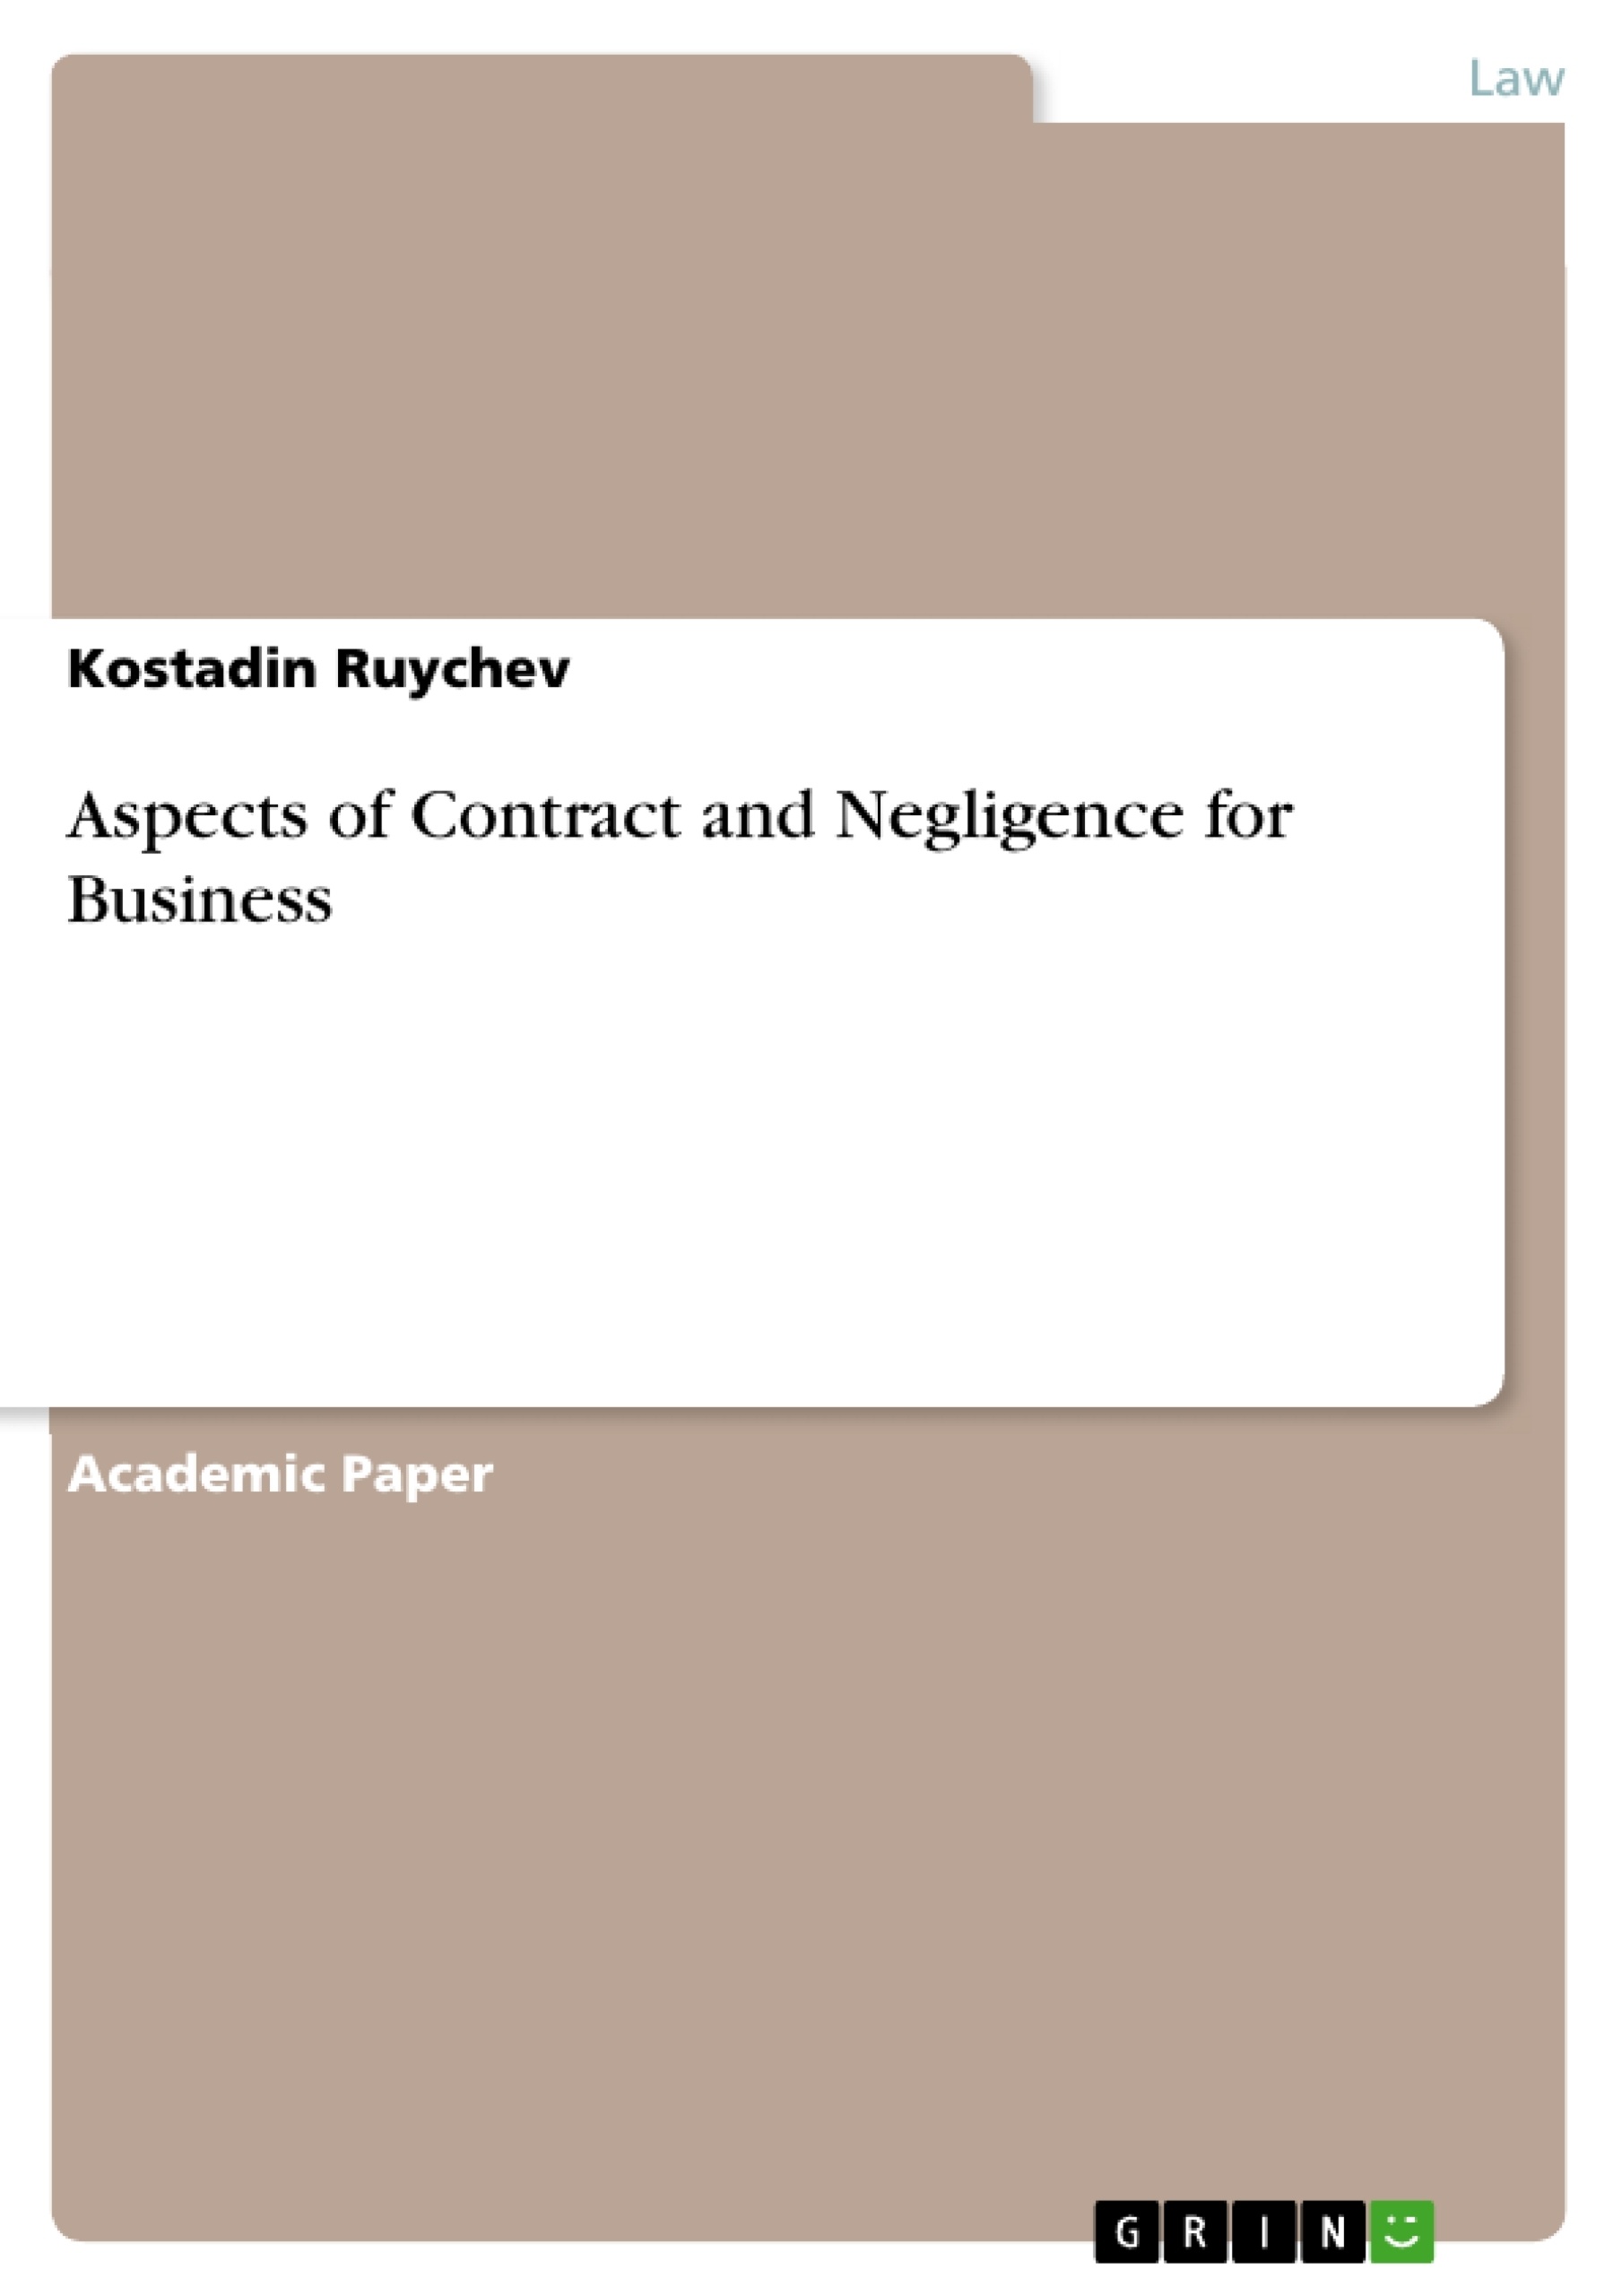 Title: Aspects of Contract and Negligence for Business